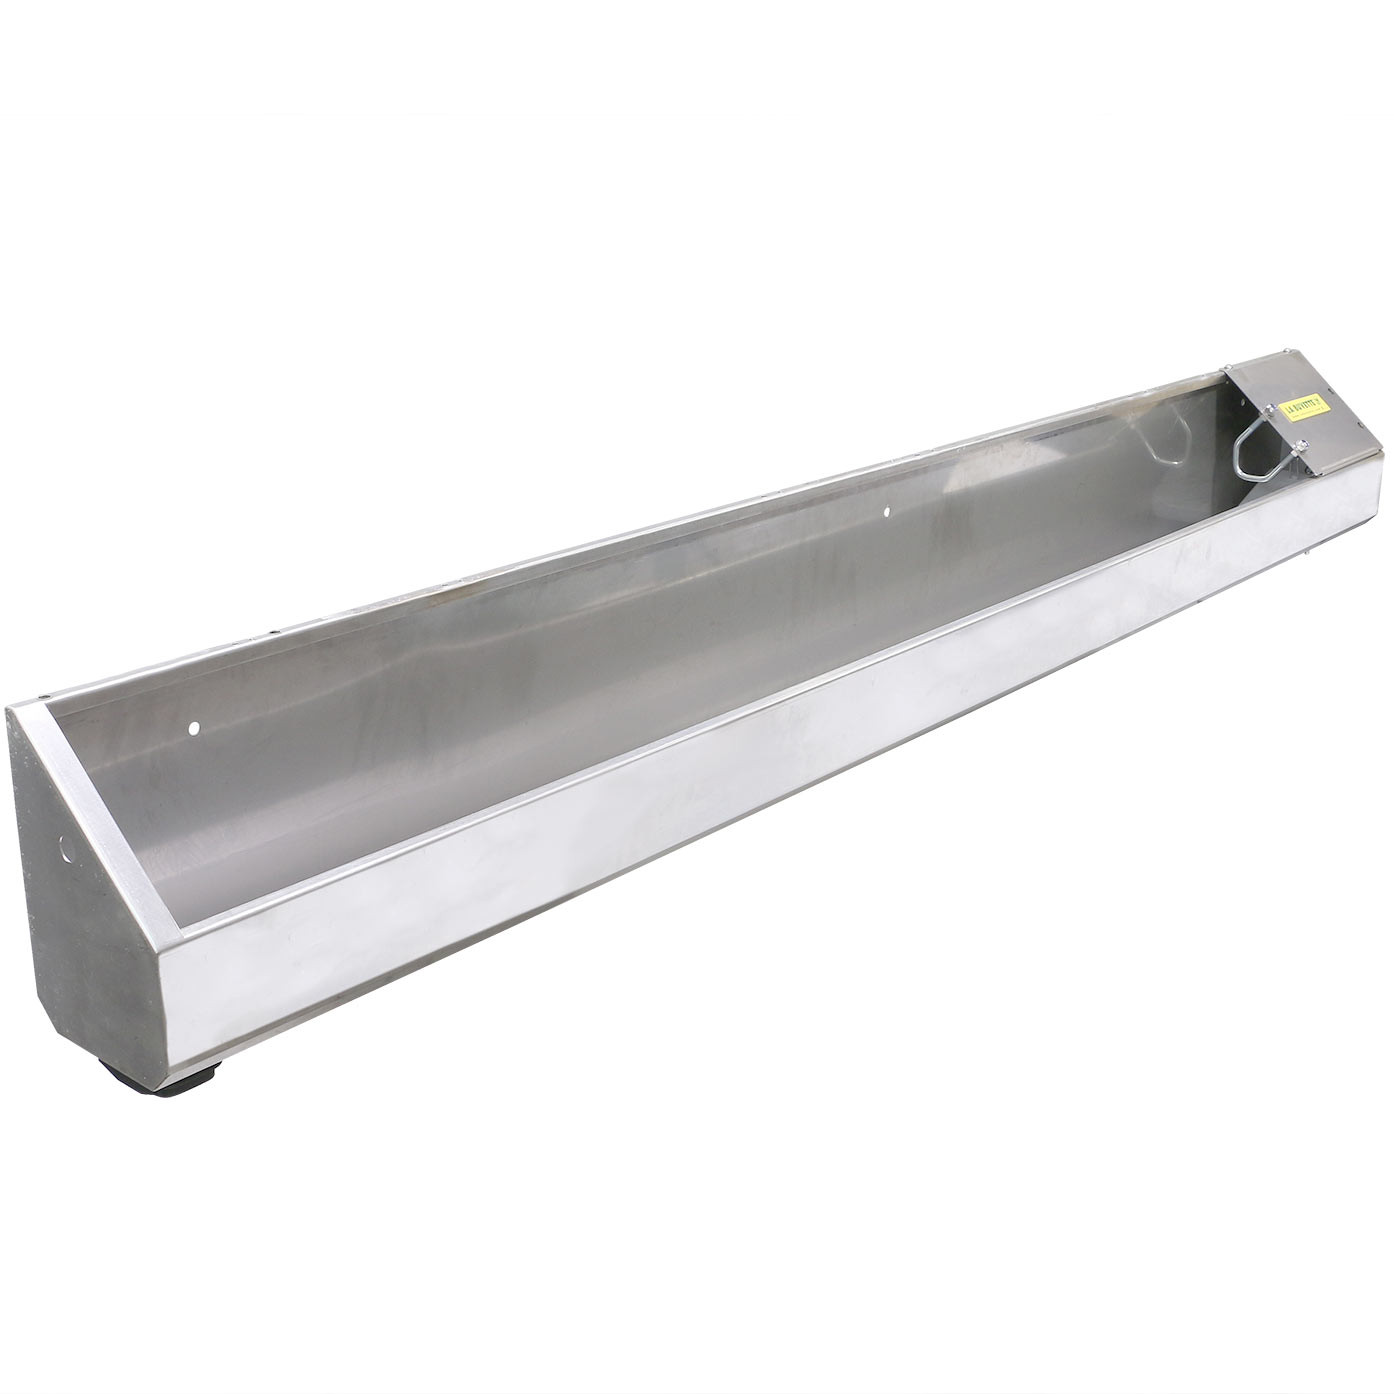 OVICAP INOX 240 stainless steel TROUGH